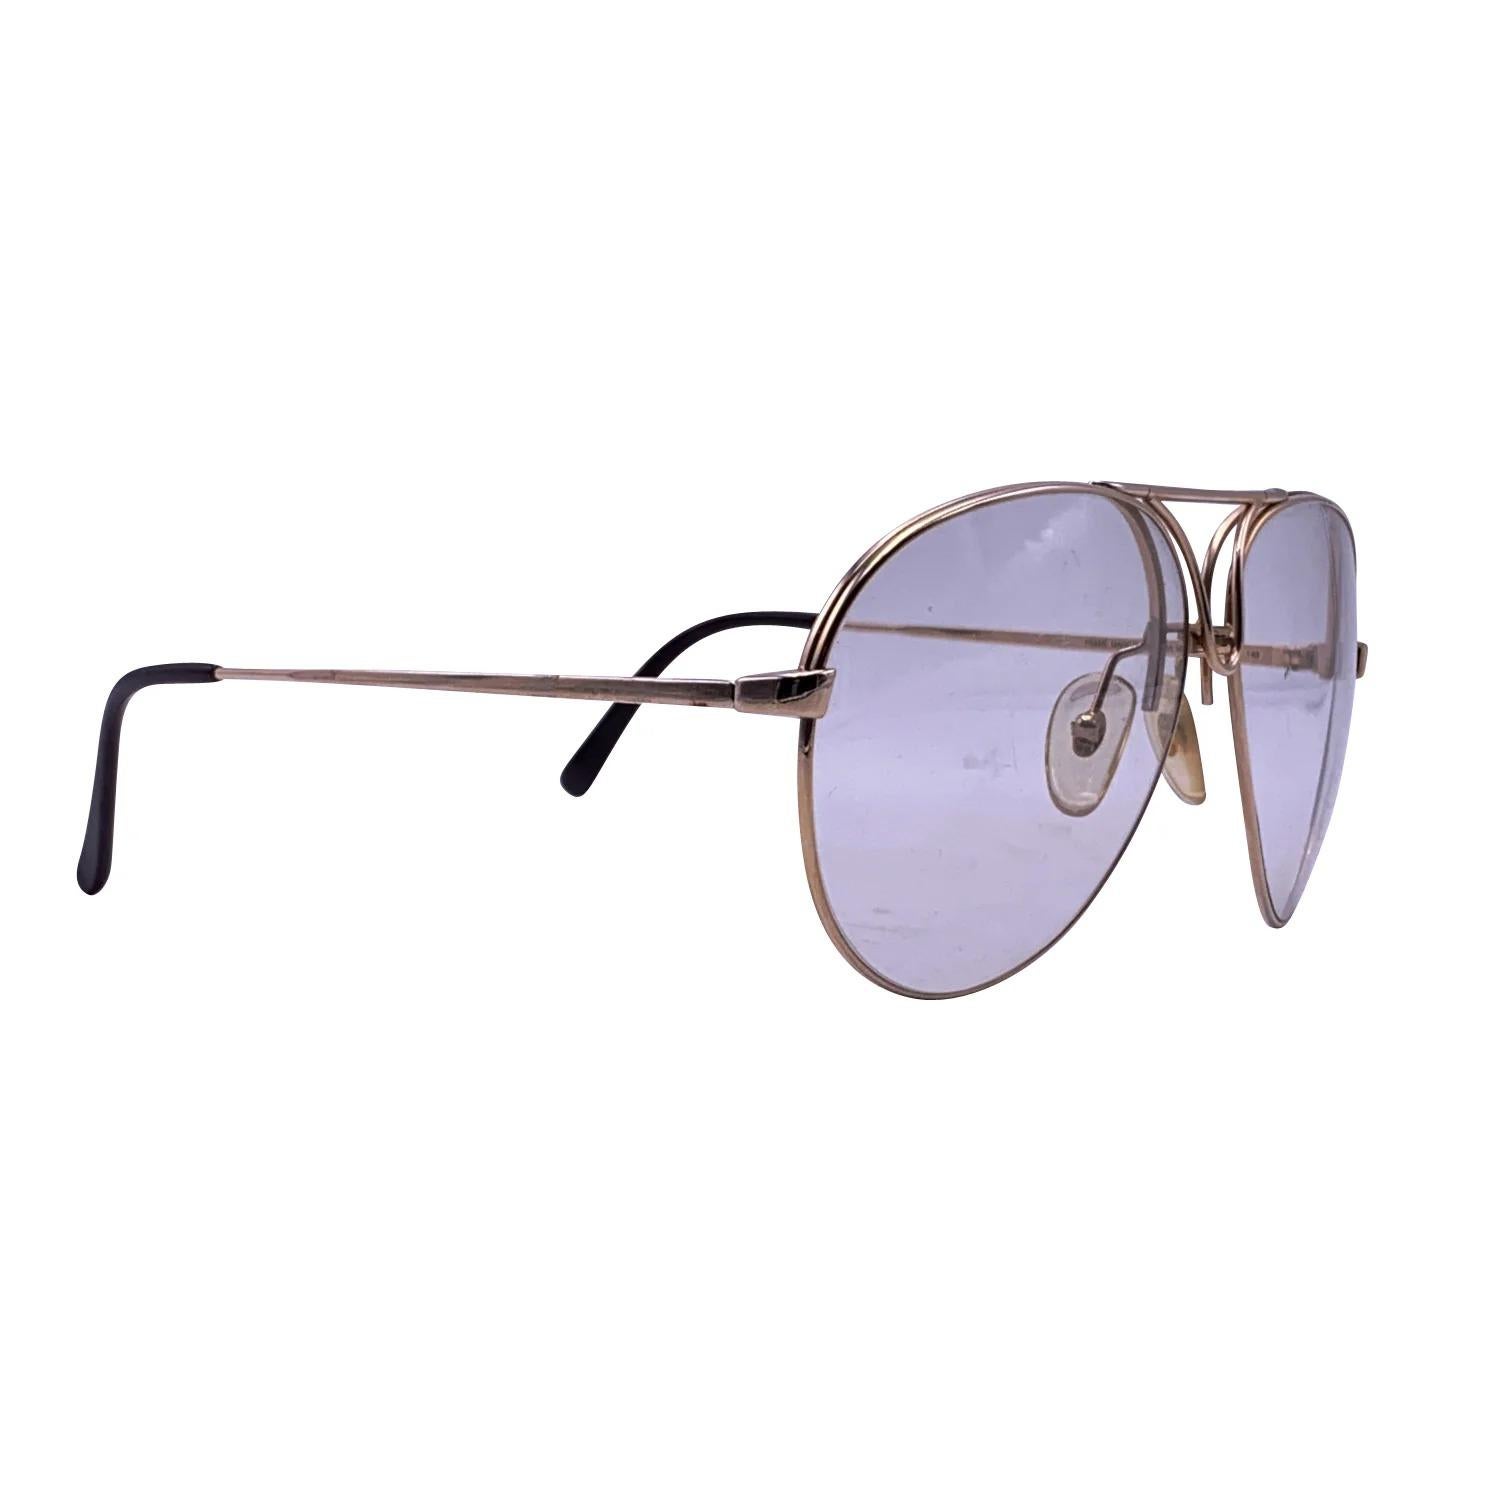 Vintage gold metal aviator eyeglasses by Carrera Porche Design, Mod. 5657.Clear demo lenses. Frame made in Austria. Details MATERIAL: Metal COLOR: Gold MODEL: 5657 GENDER: Unisex Adults COUNTRY OF MANUFACTURE: Austria ORIGINAL CASE?: No STYLE: Full